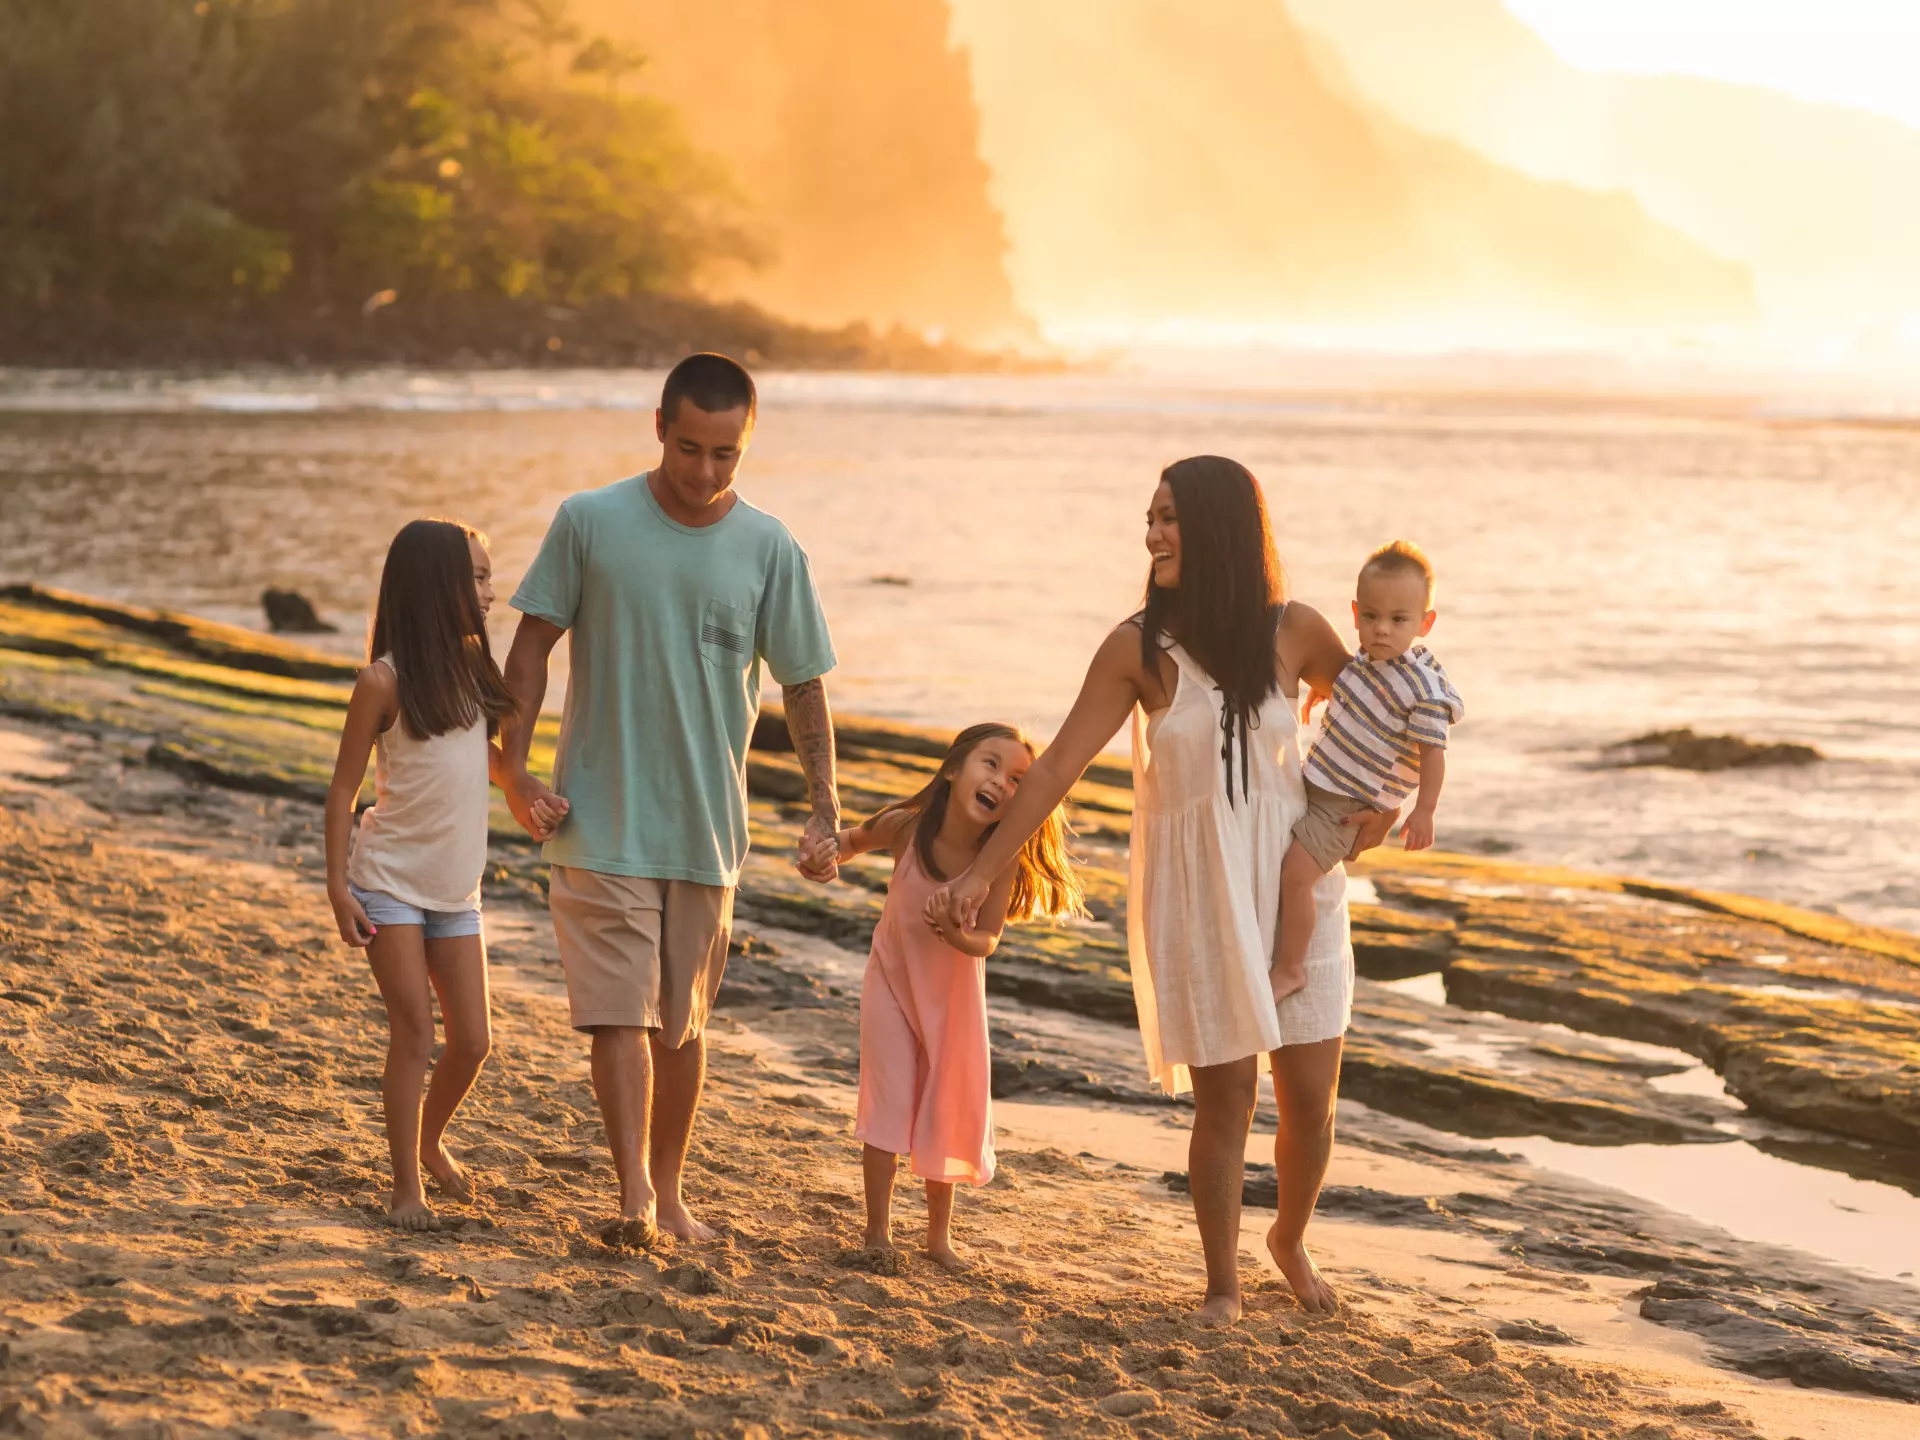 A family of five on vacation and enjoying the sunset by the beach